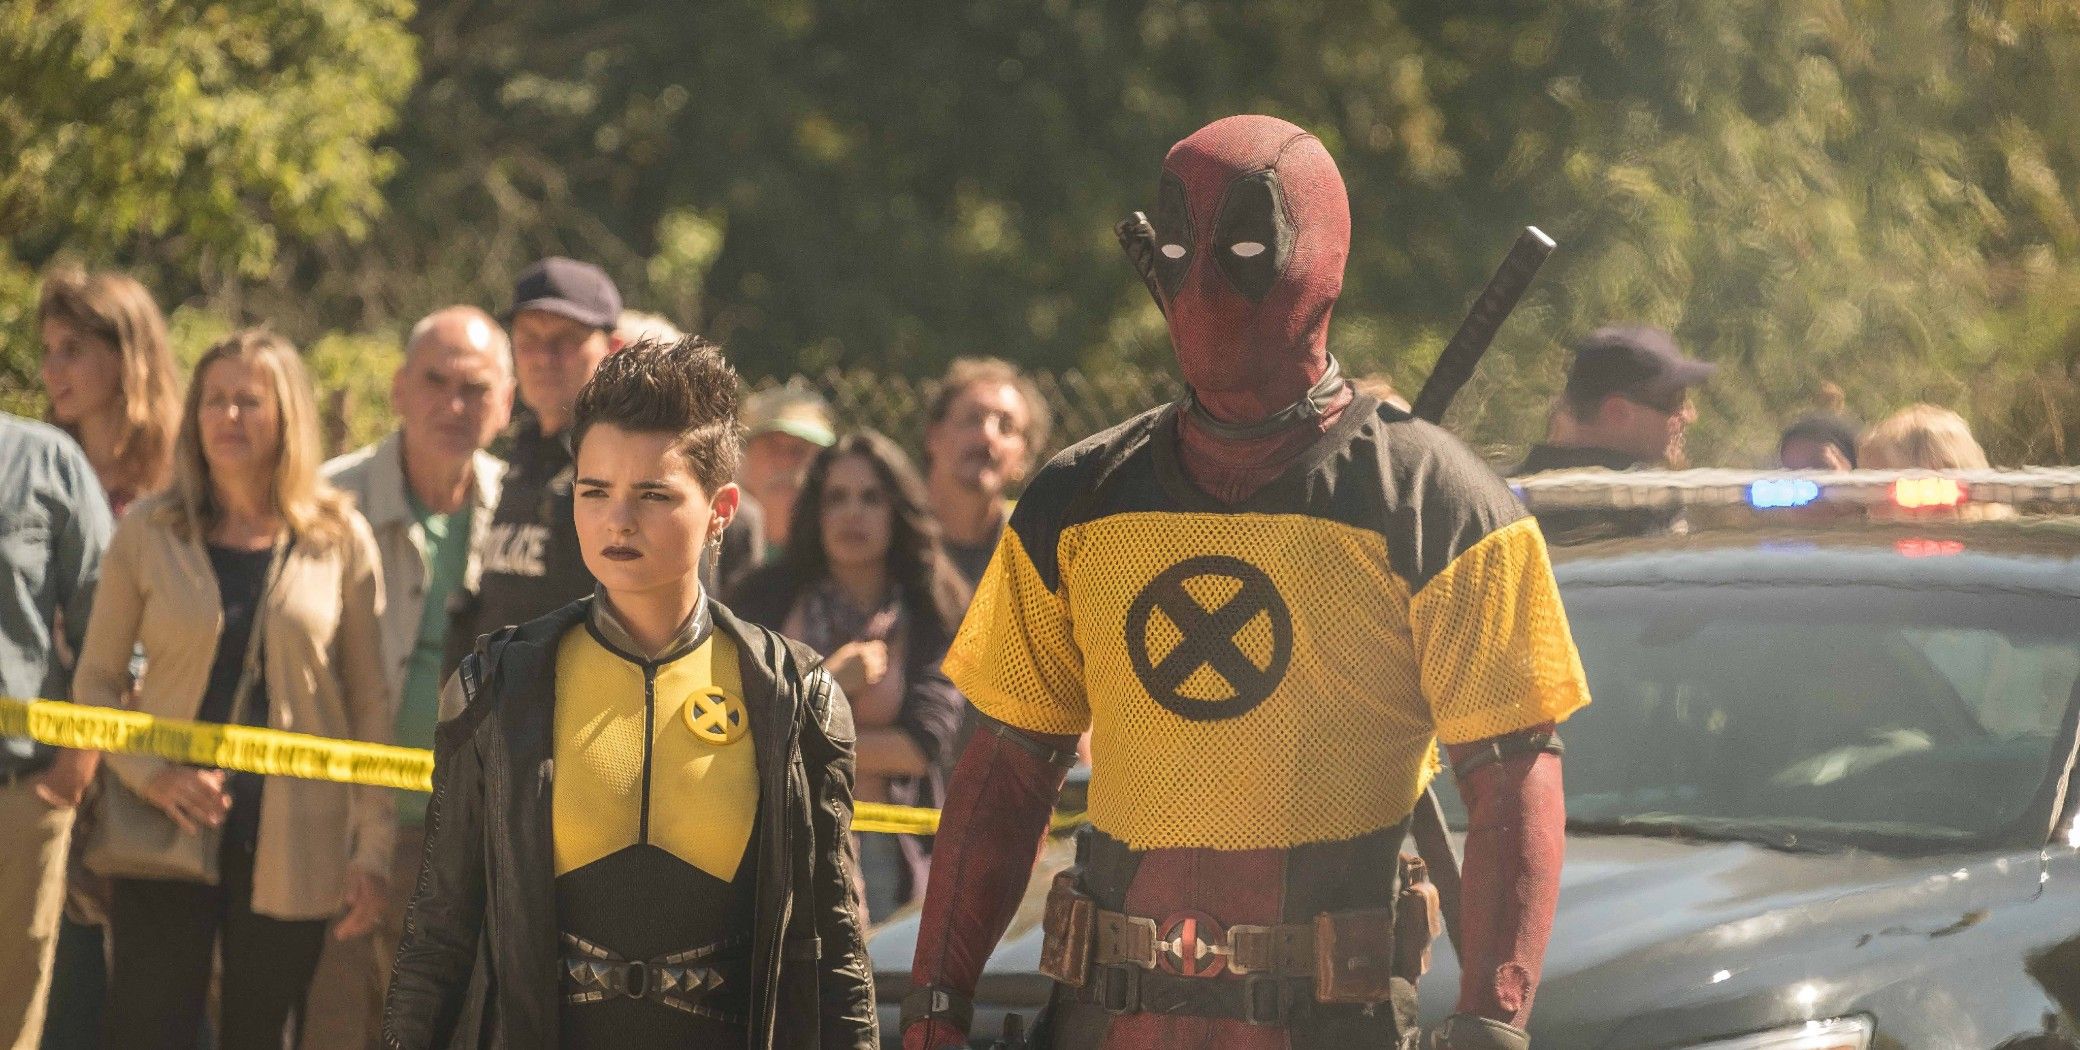 Deadpool 3 release date, cast and more